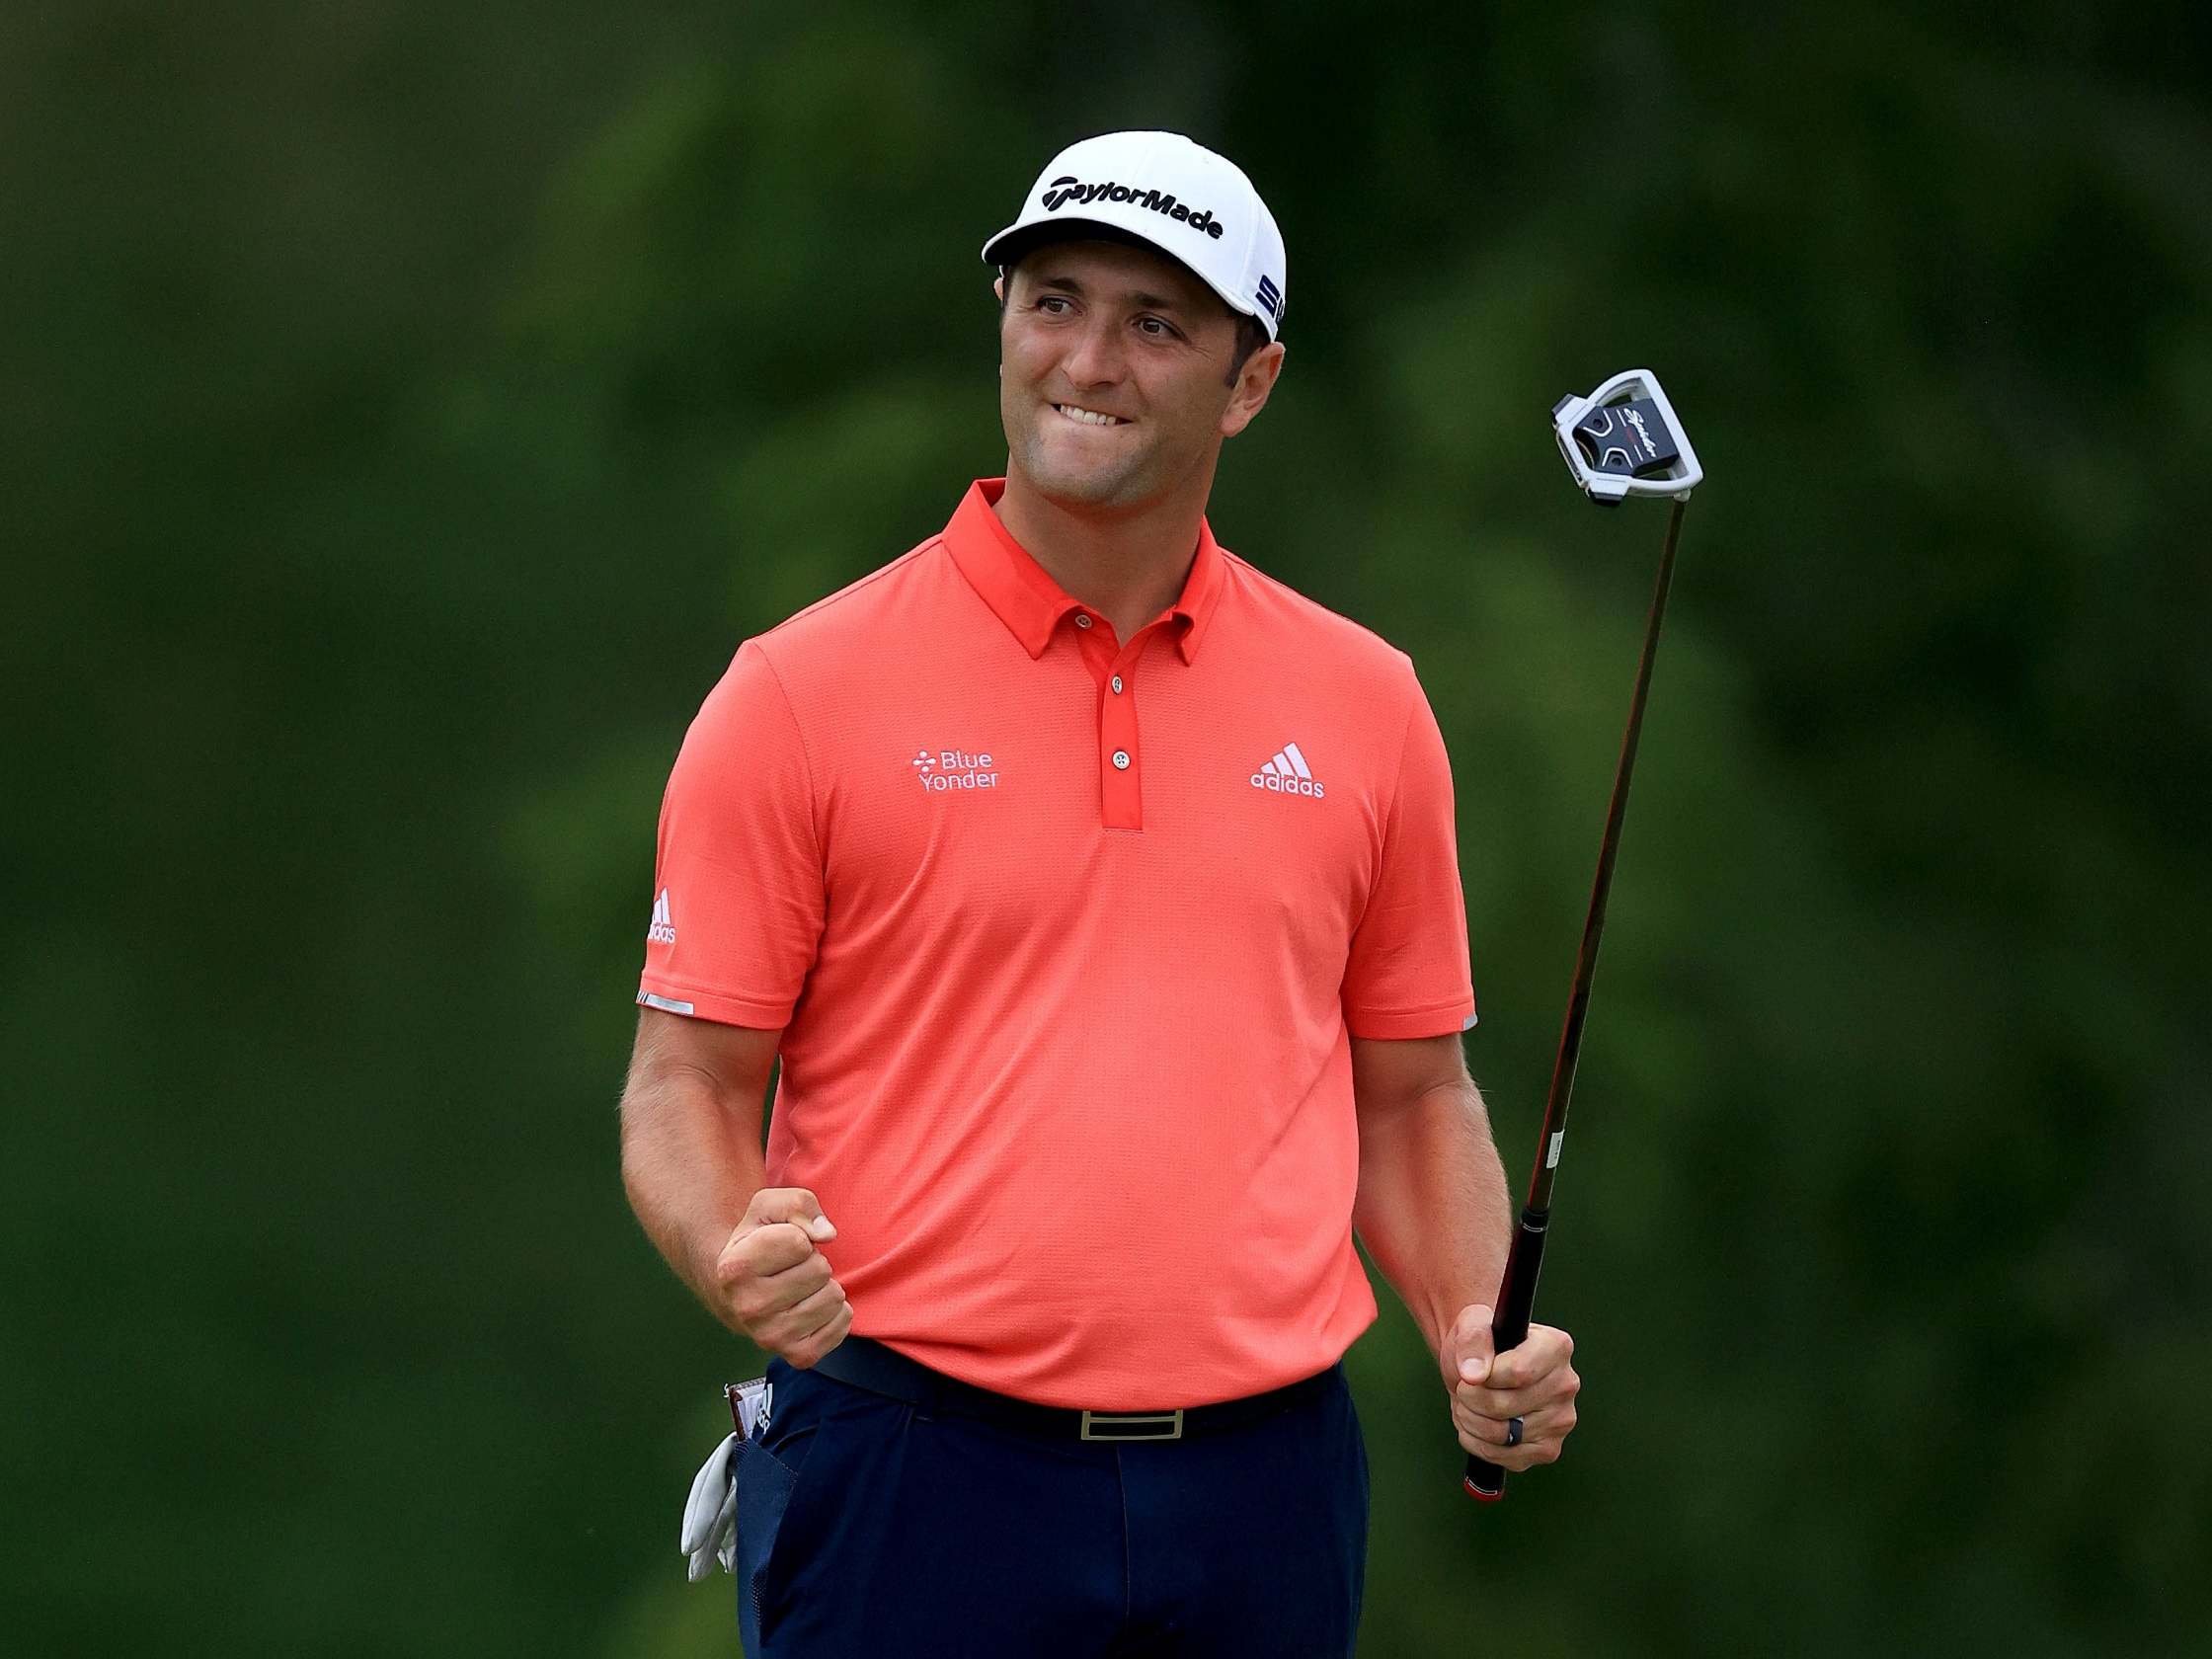 Jon Rahm has replaced Rory McIlroy as the world No 1 after his victory at the Memorial Tournament